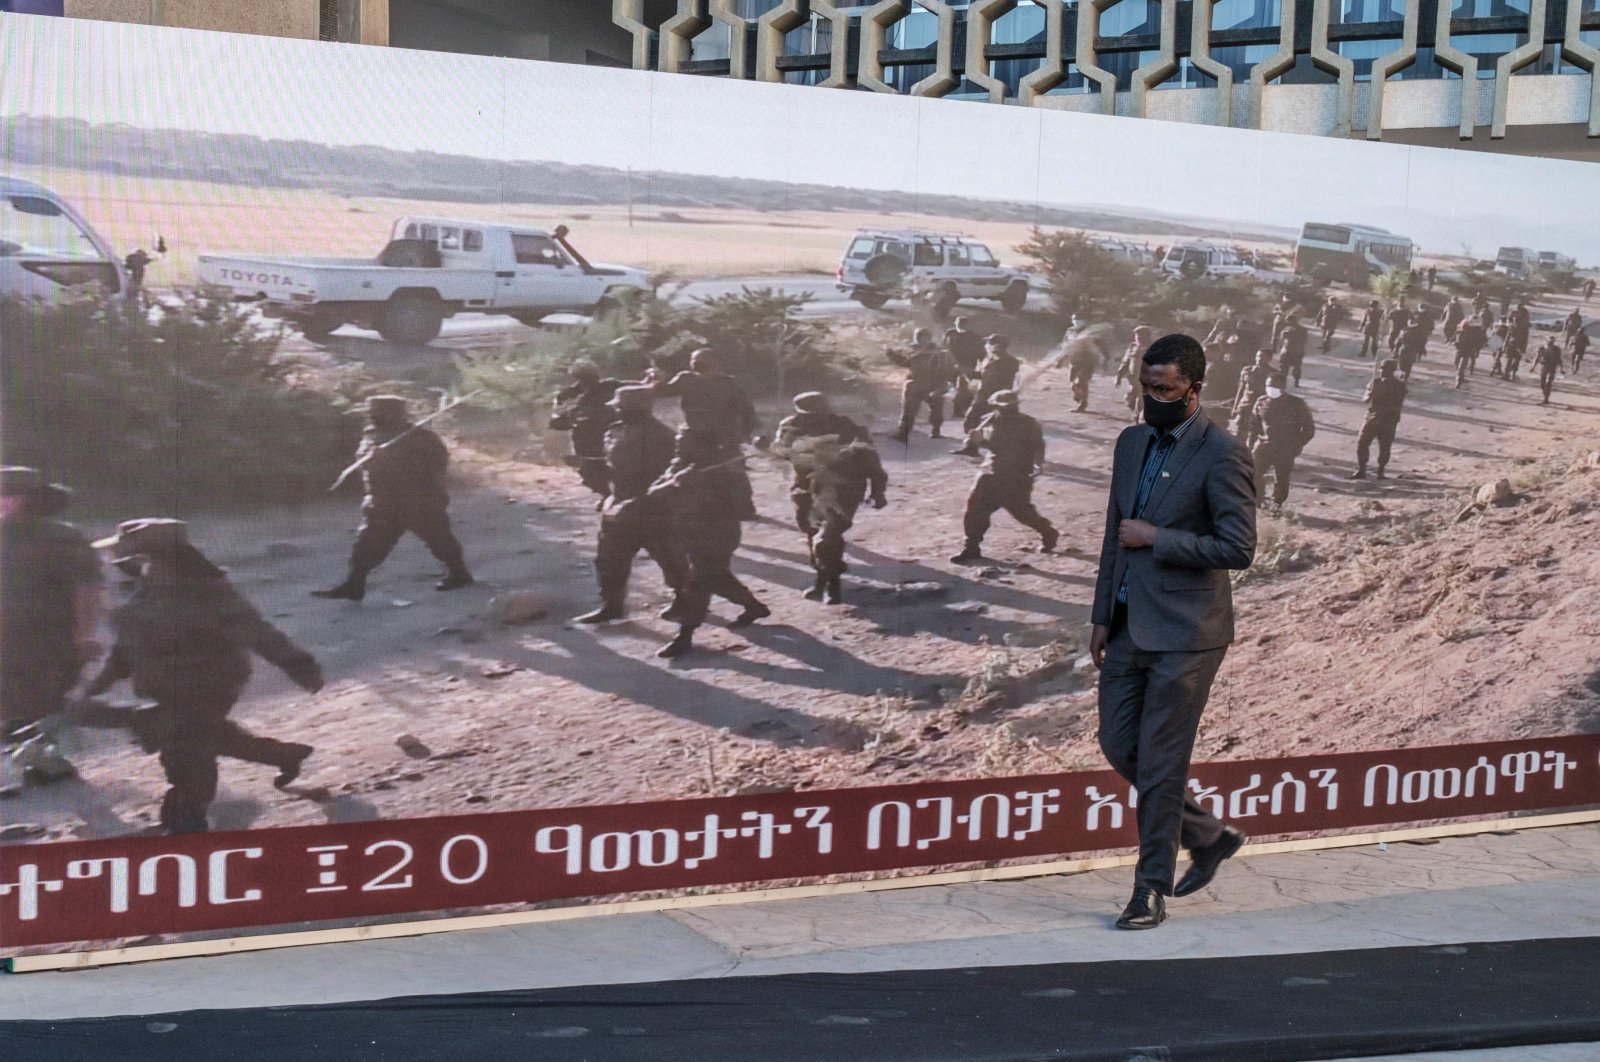 A man walks along a screen featuring soldiers during a memorial service for the victims of the Tigray conflict organized by the city administration, in Addis Ababa, Ethiopia, Nov. 3, 2021. (AFP Photo)